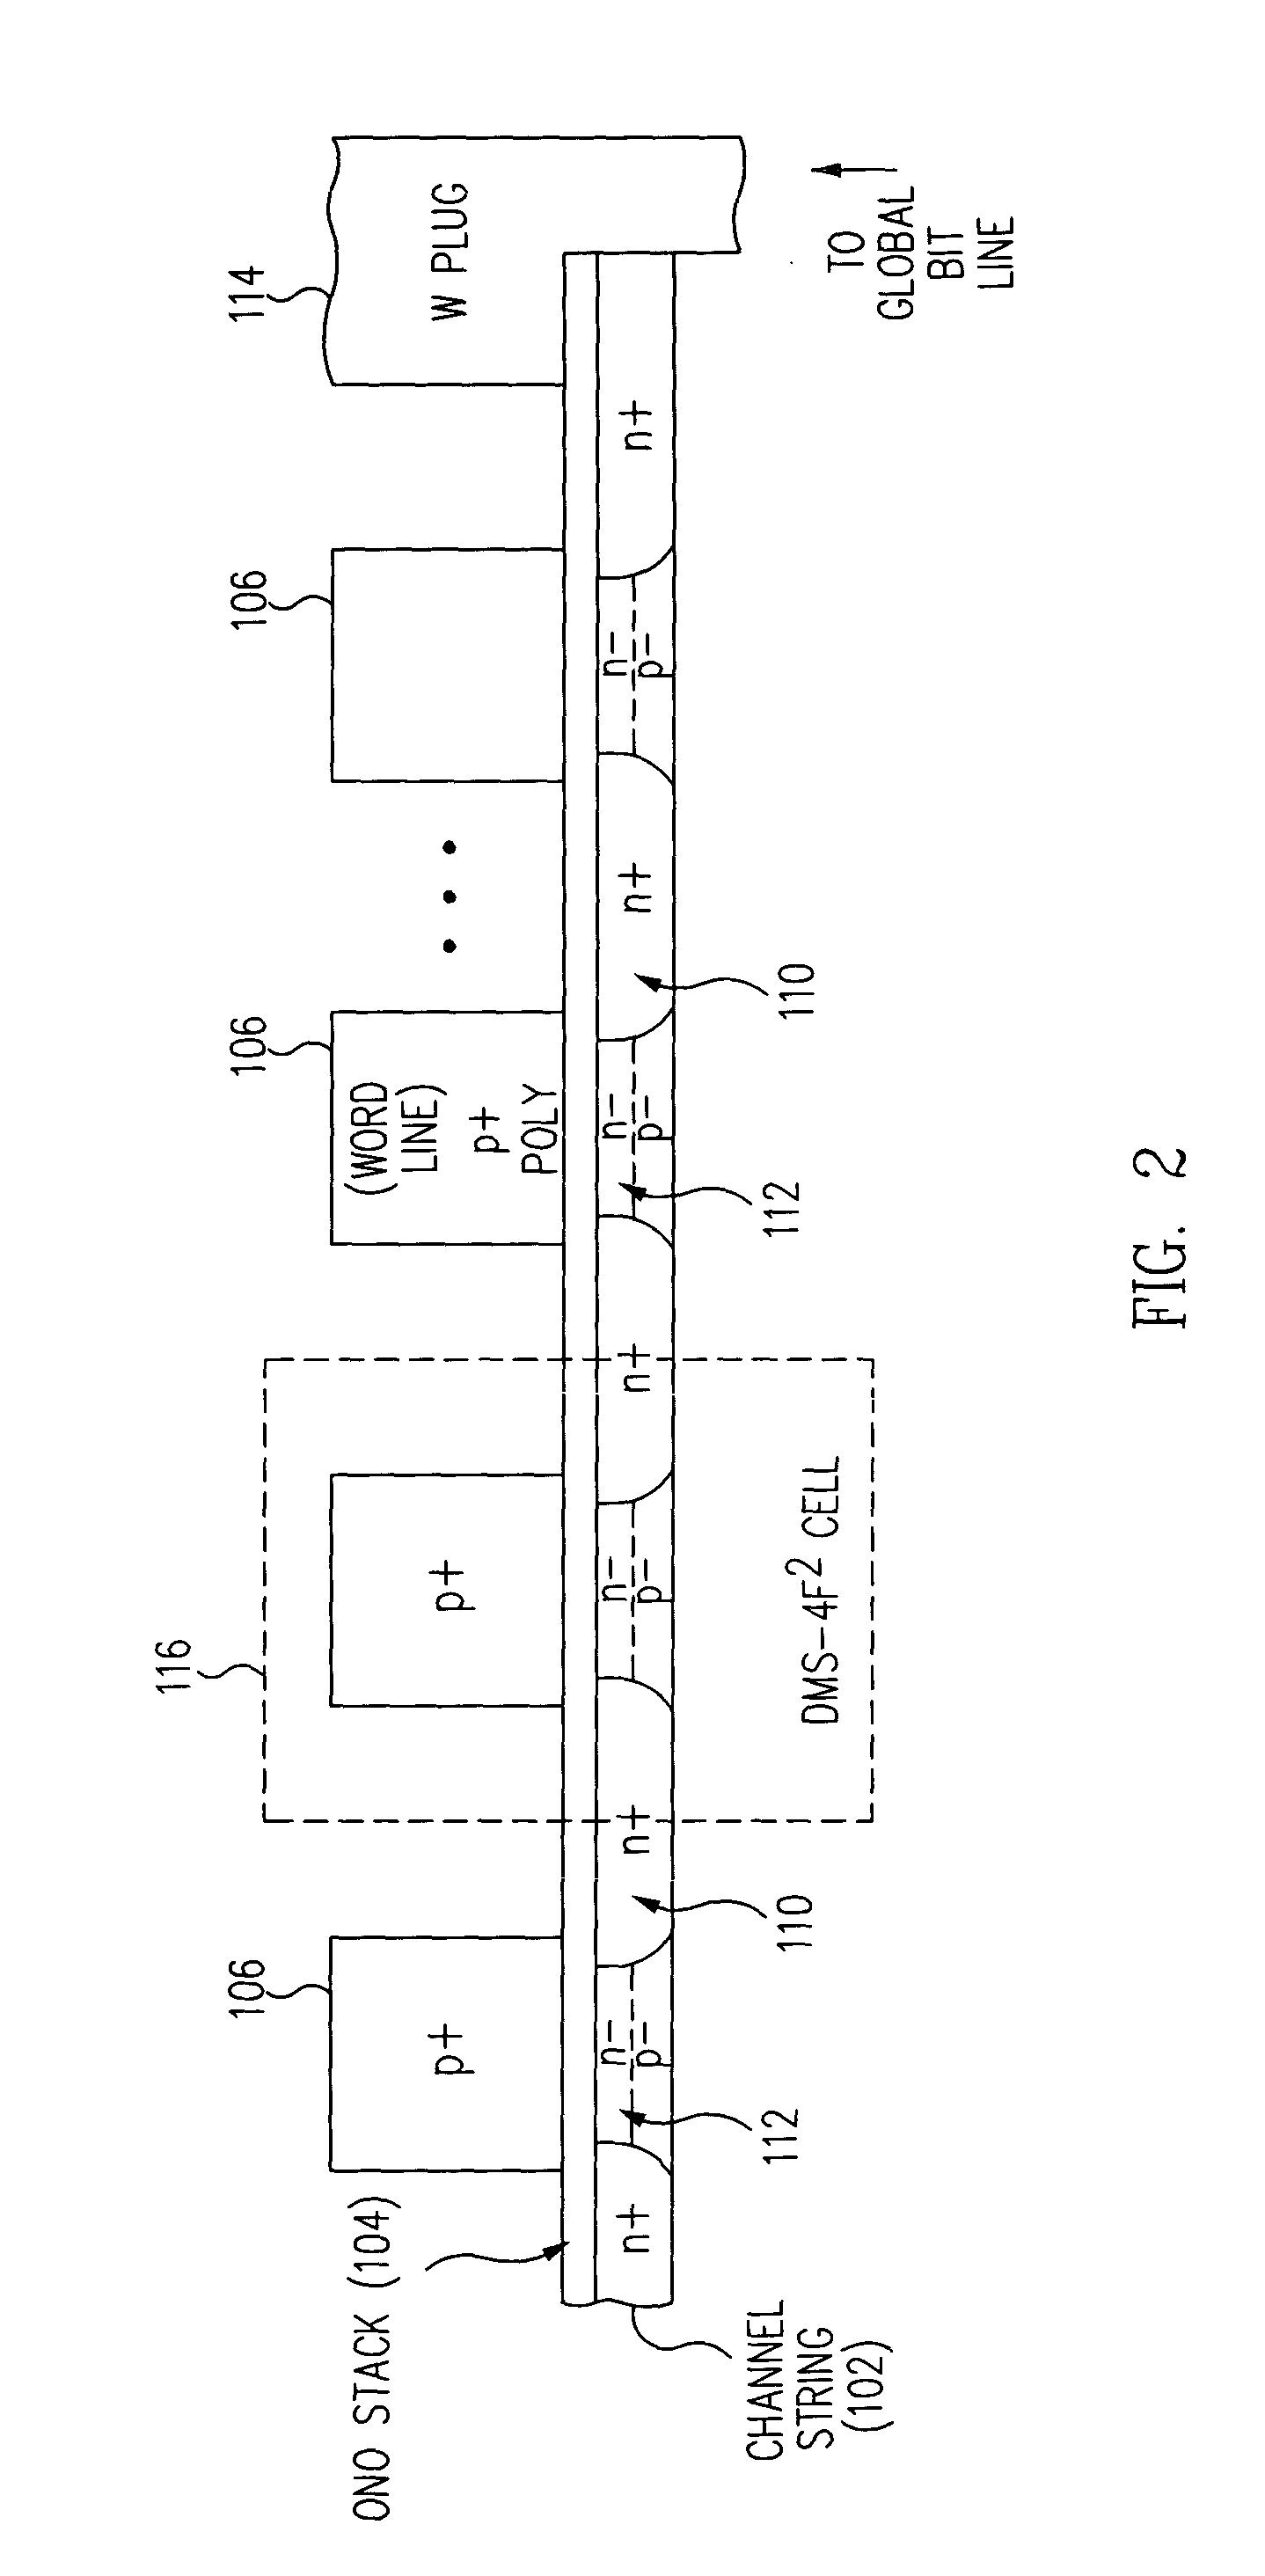 Programmable memory array structure incorporating series-connected transistor strings and methods for fabrication and operation of same